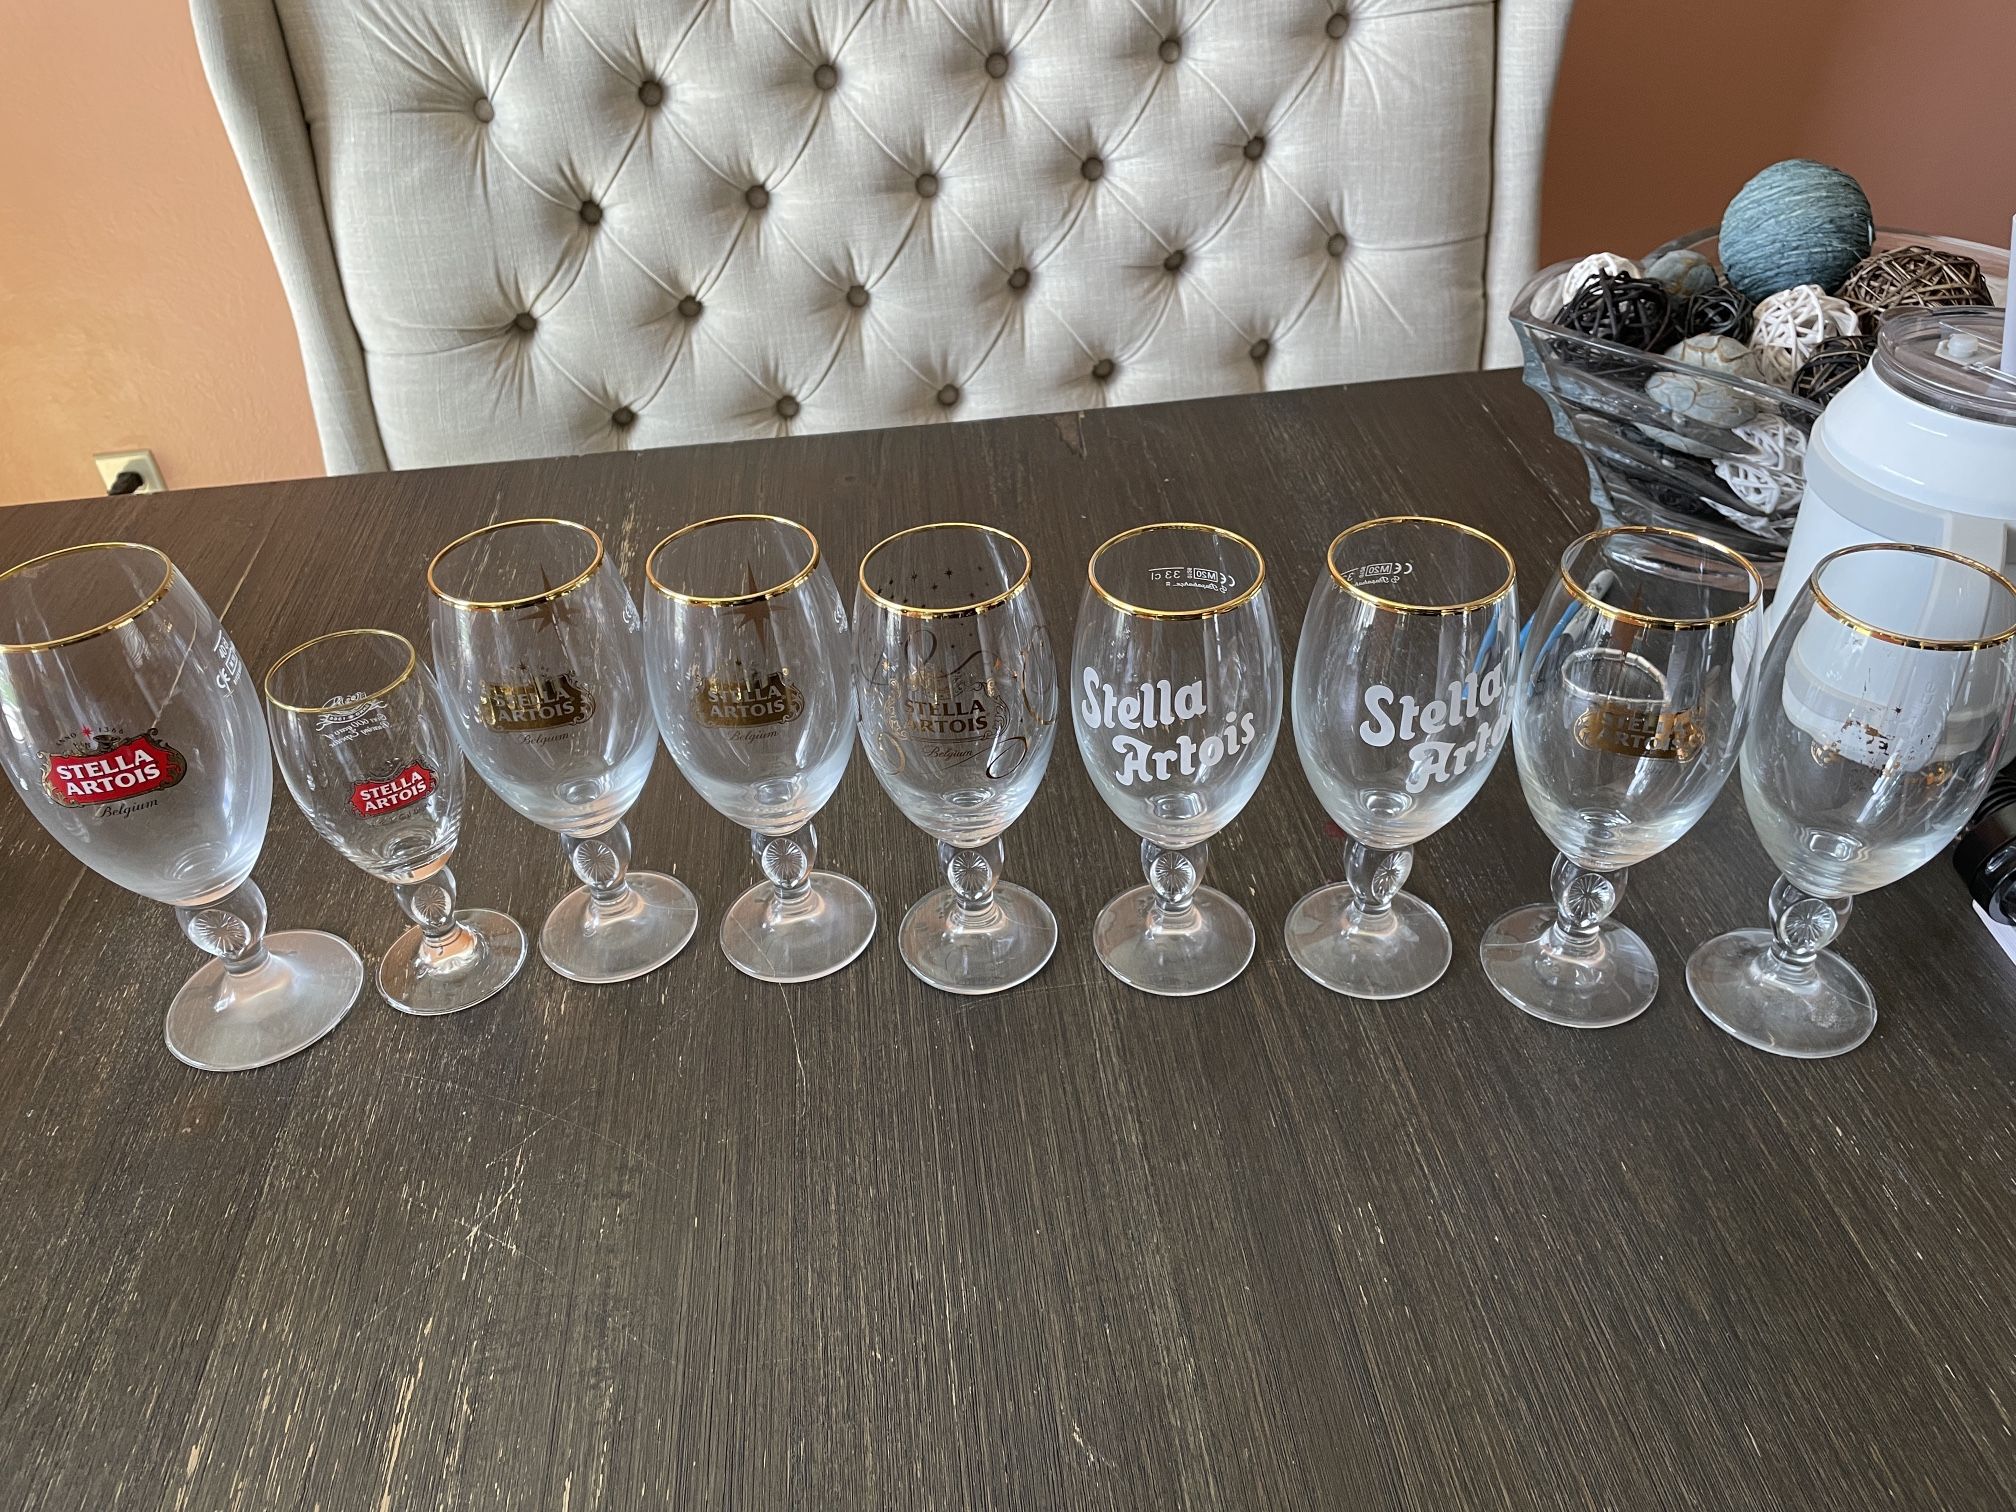 Beer And Liquor Glasses